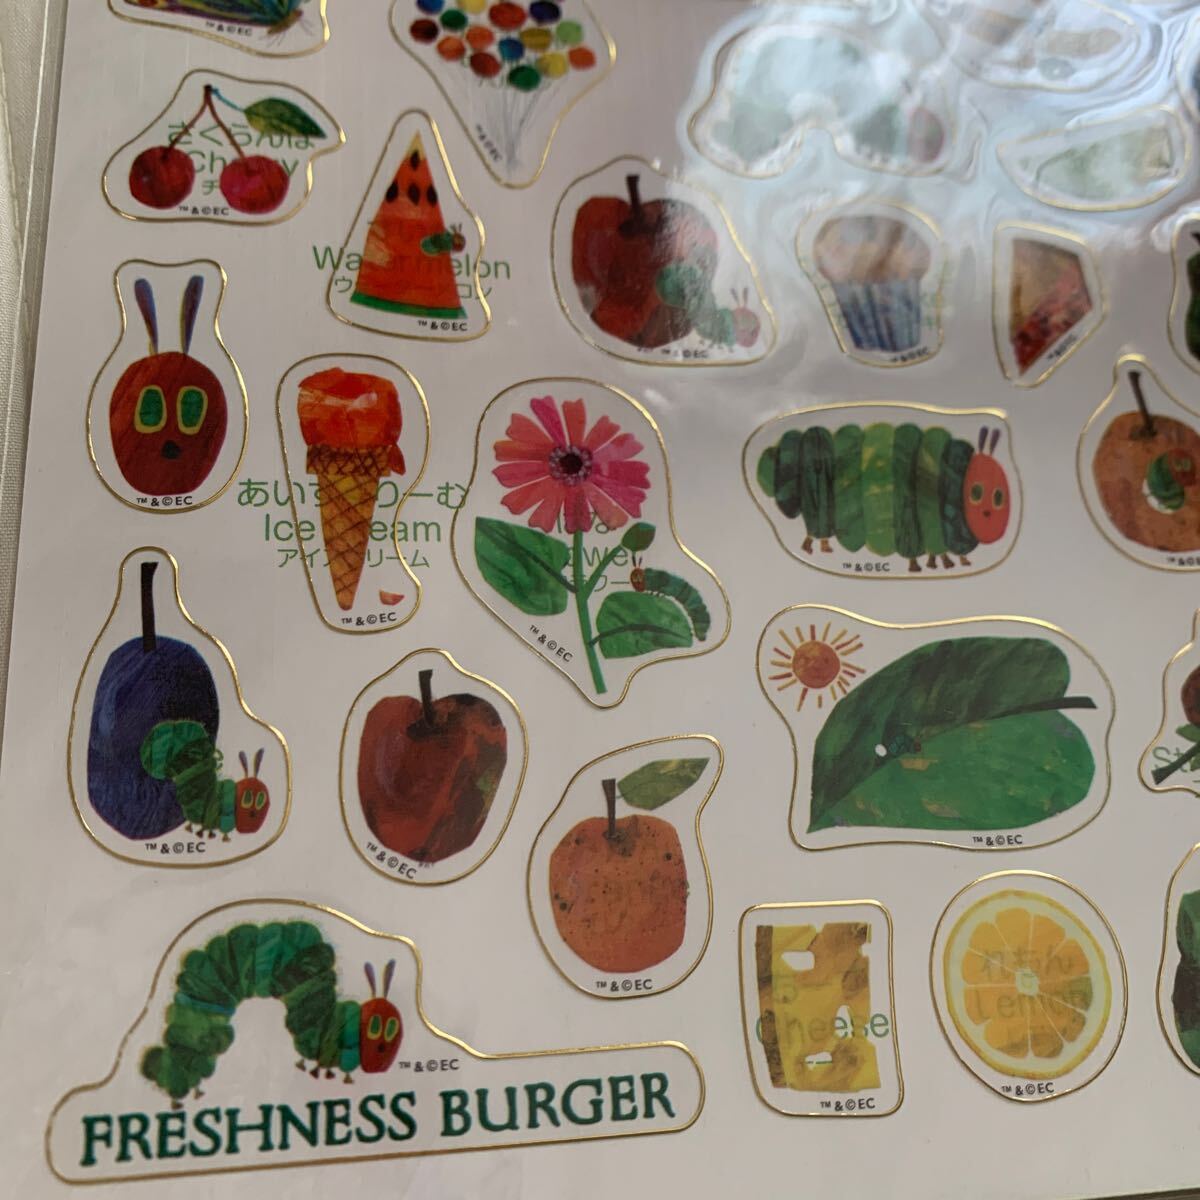  fresh nes burger Eric Karl is .......ERIC CARLE is ..-.-. seal sticker Kids set not for sale unopened new goods 